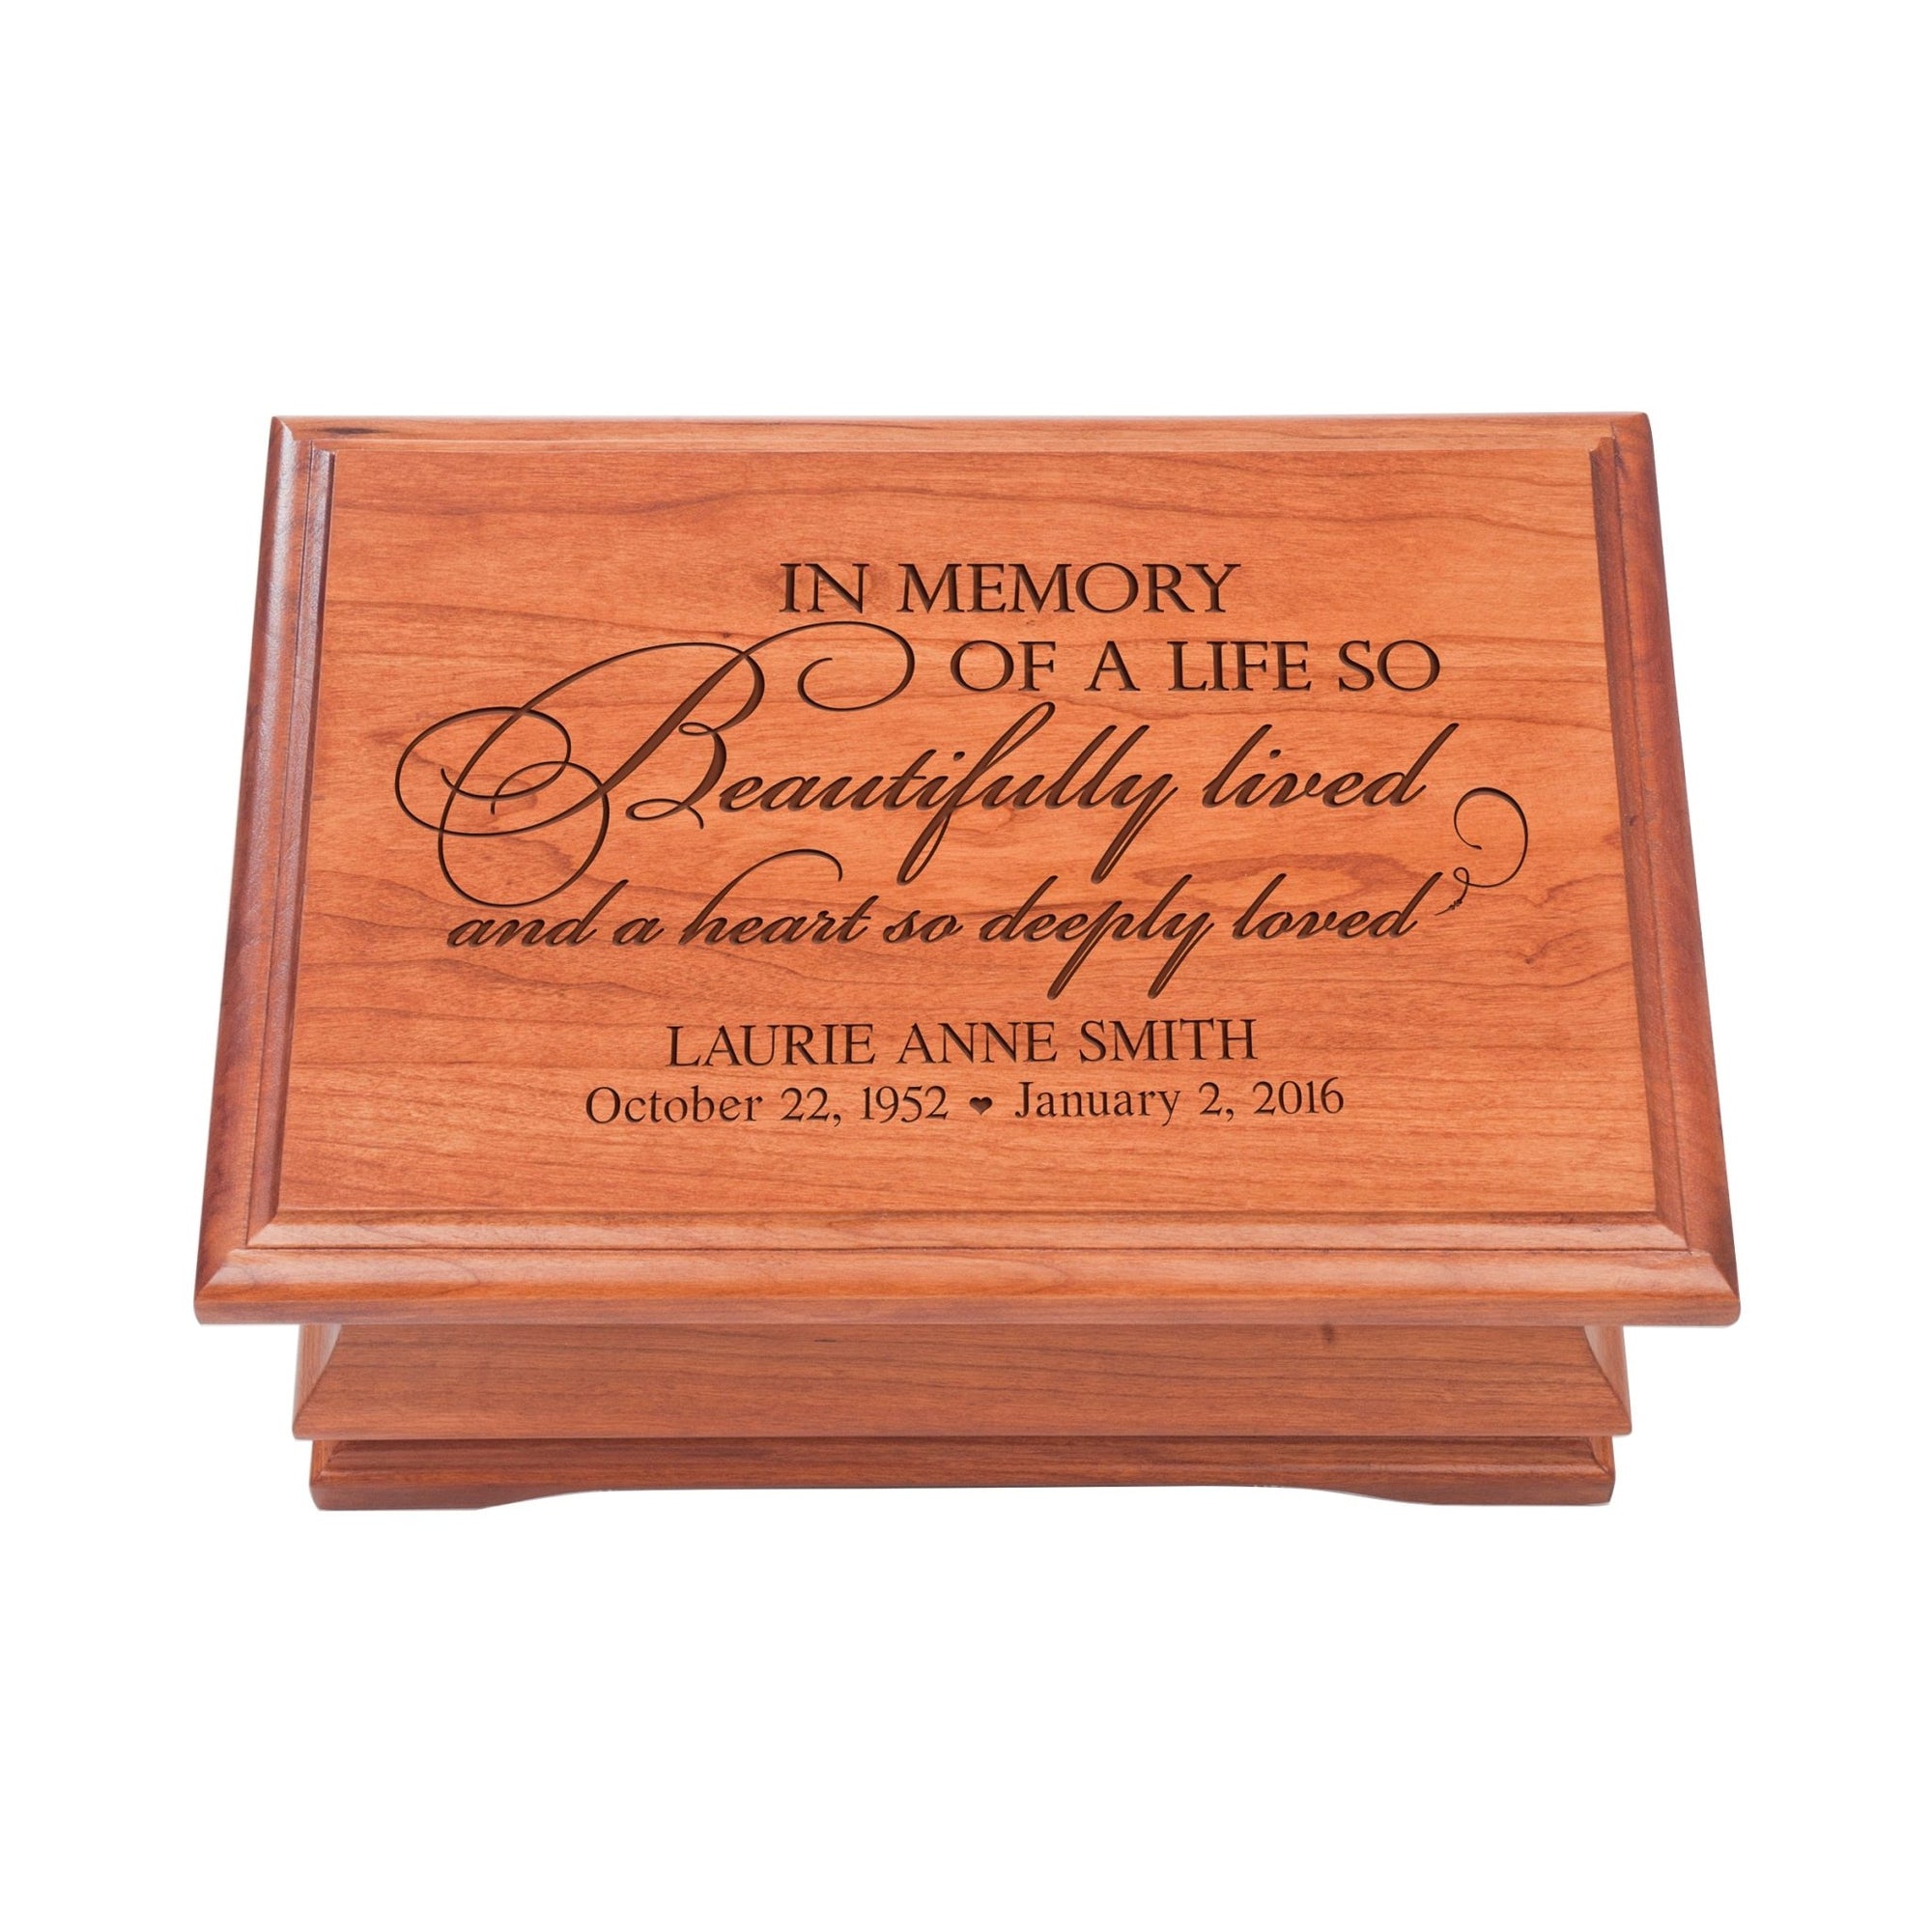 Personalized Wooden Memorial Jewelry Box Organizer 11.5x8.25 – In Memory Of A Life - LifeSong Milestones